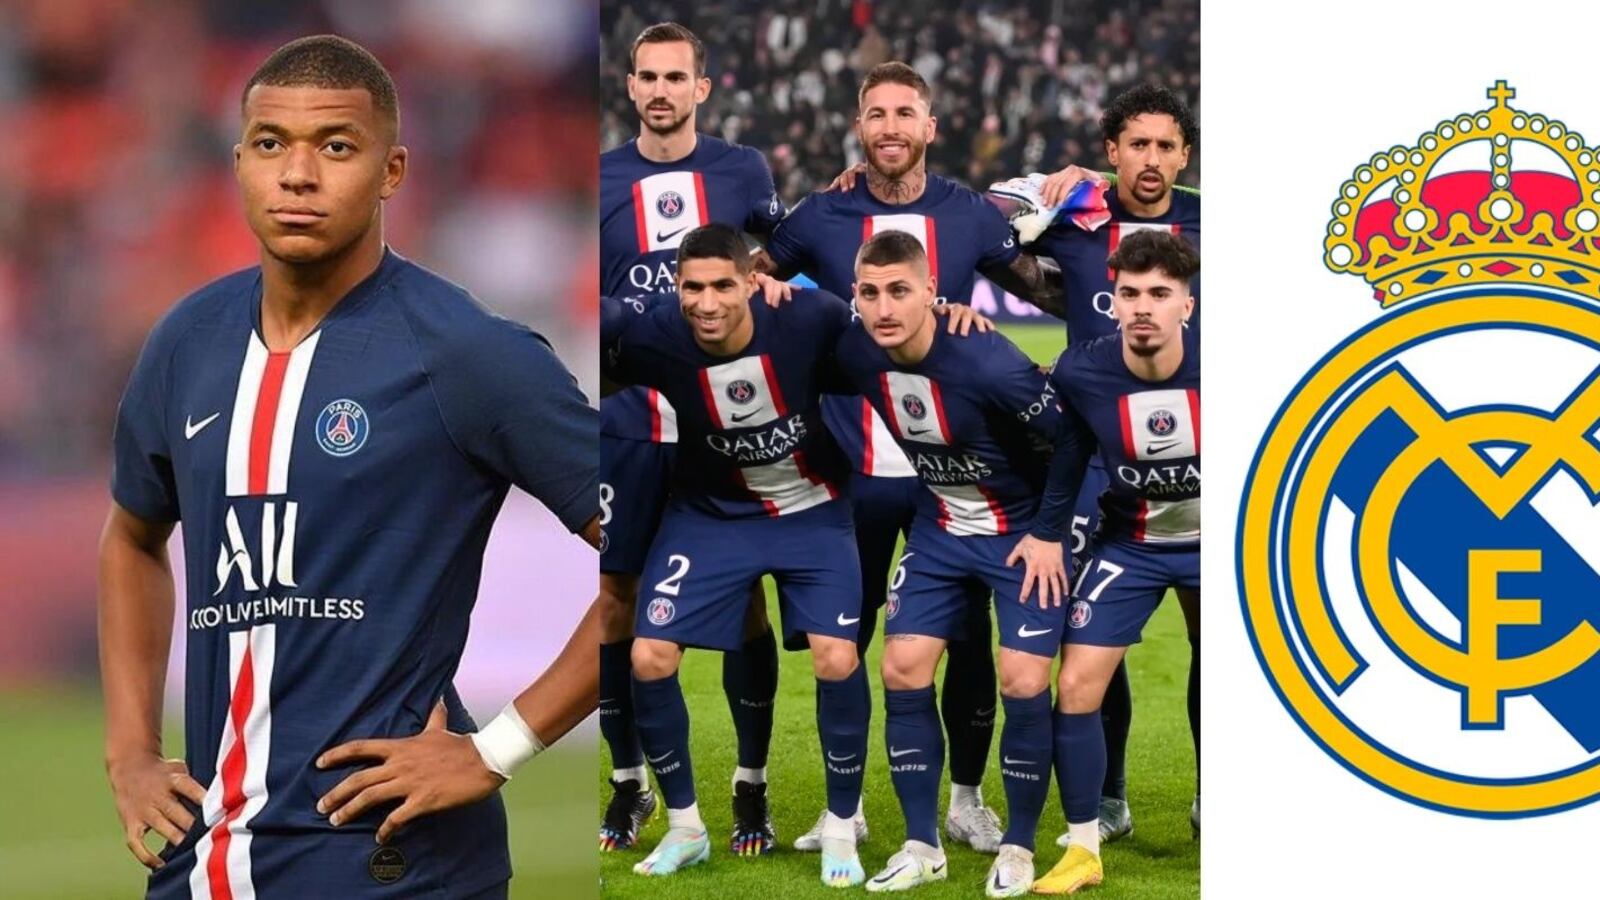 World surprise, the PSG player who wants to play for Real Madrid and leave Mbappé alone